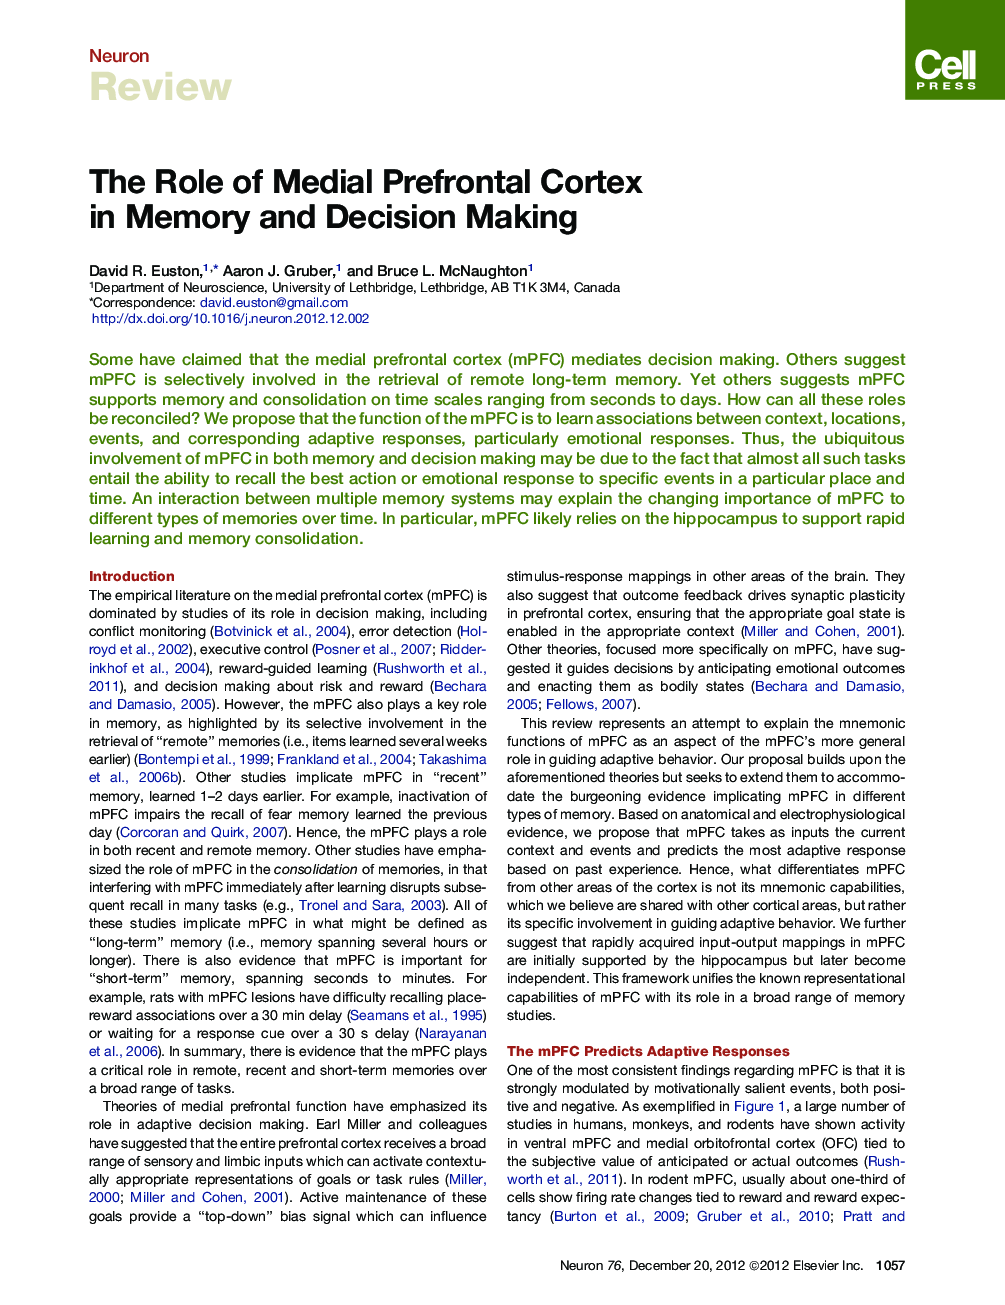 The Role of Medial Prefrontal Cortex in Memory and Decision Making